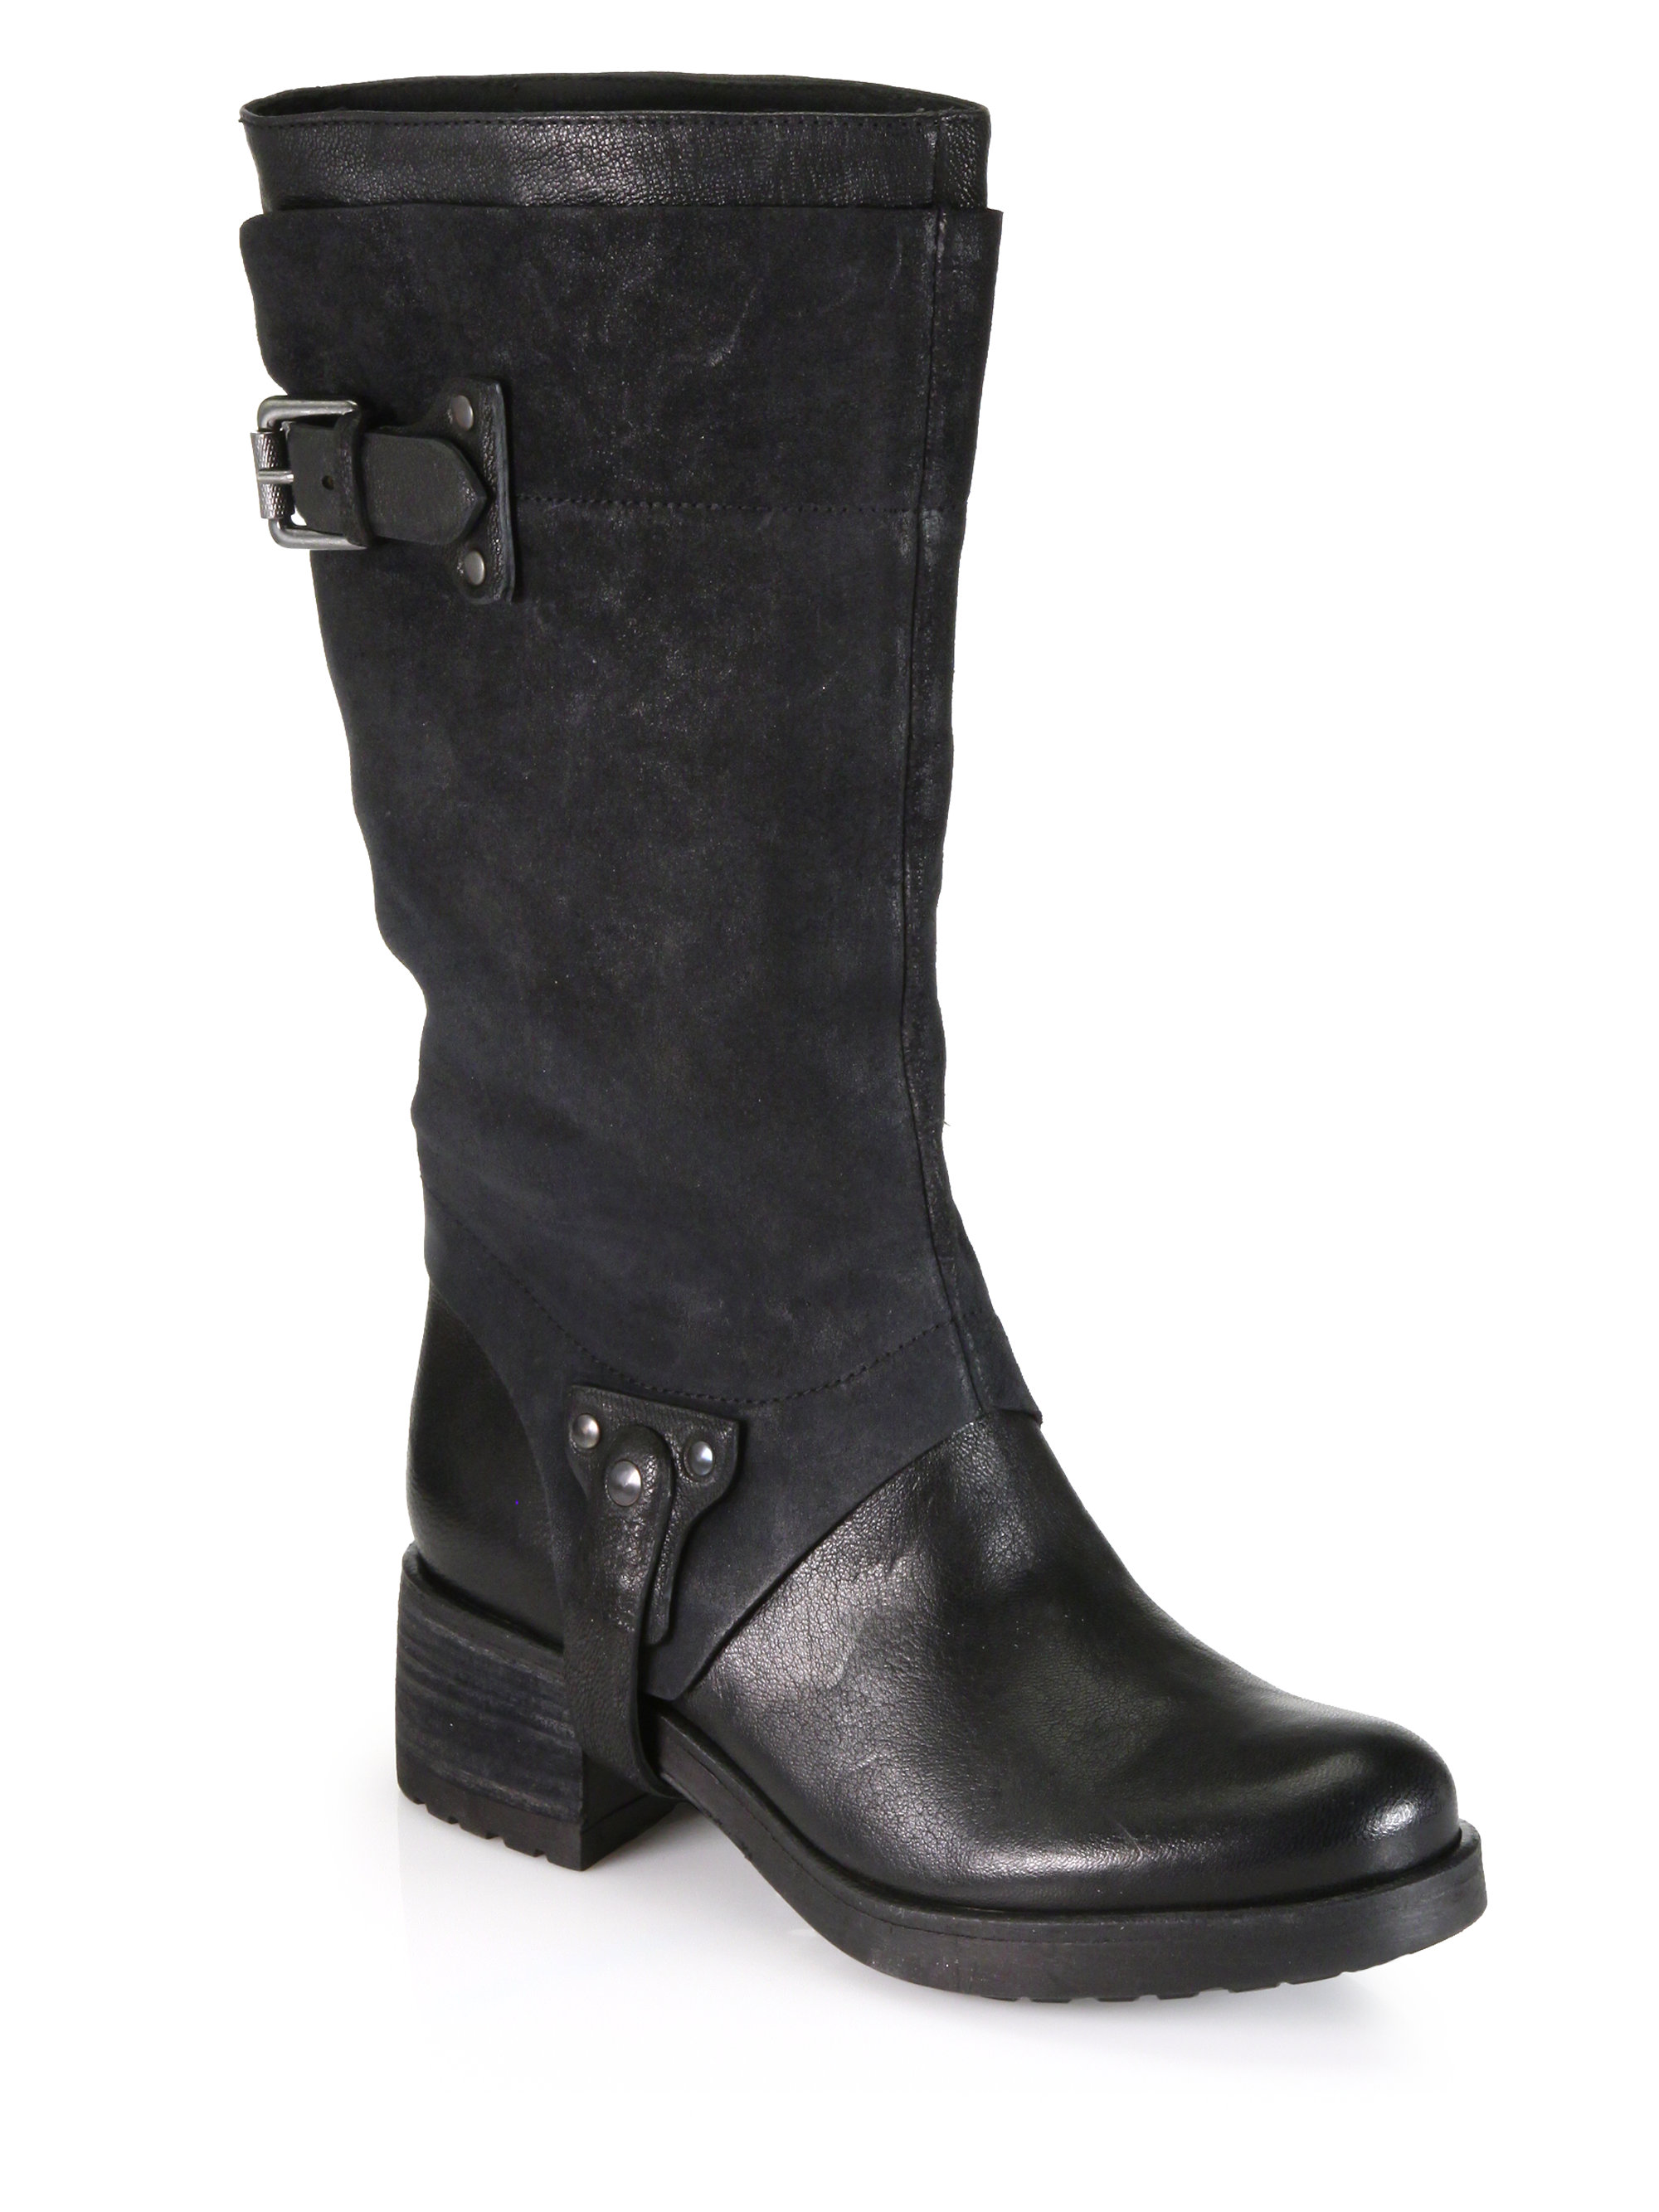 Vera Wang Lavender Essie Suede Leather Motorcycle Boots in Black | Lyst